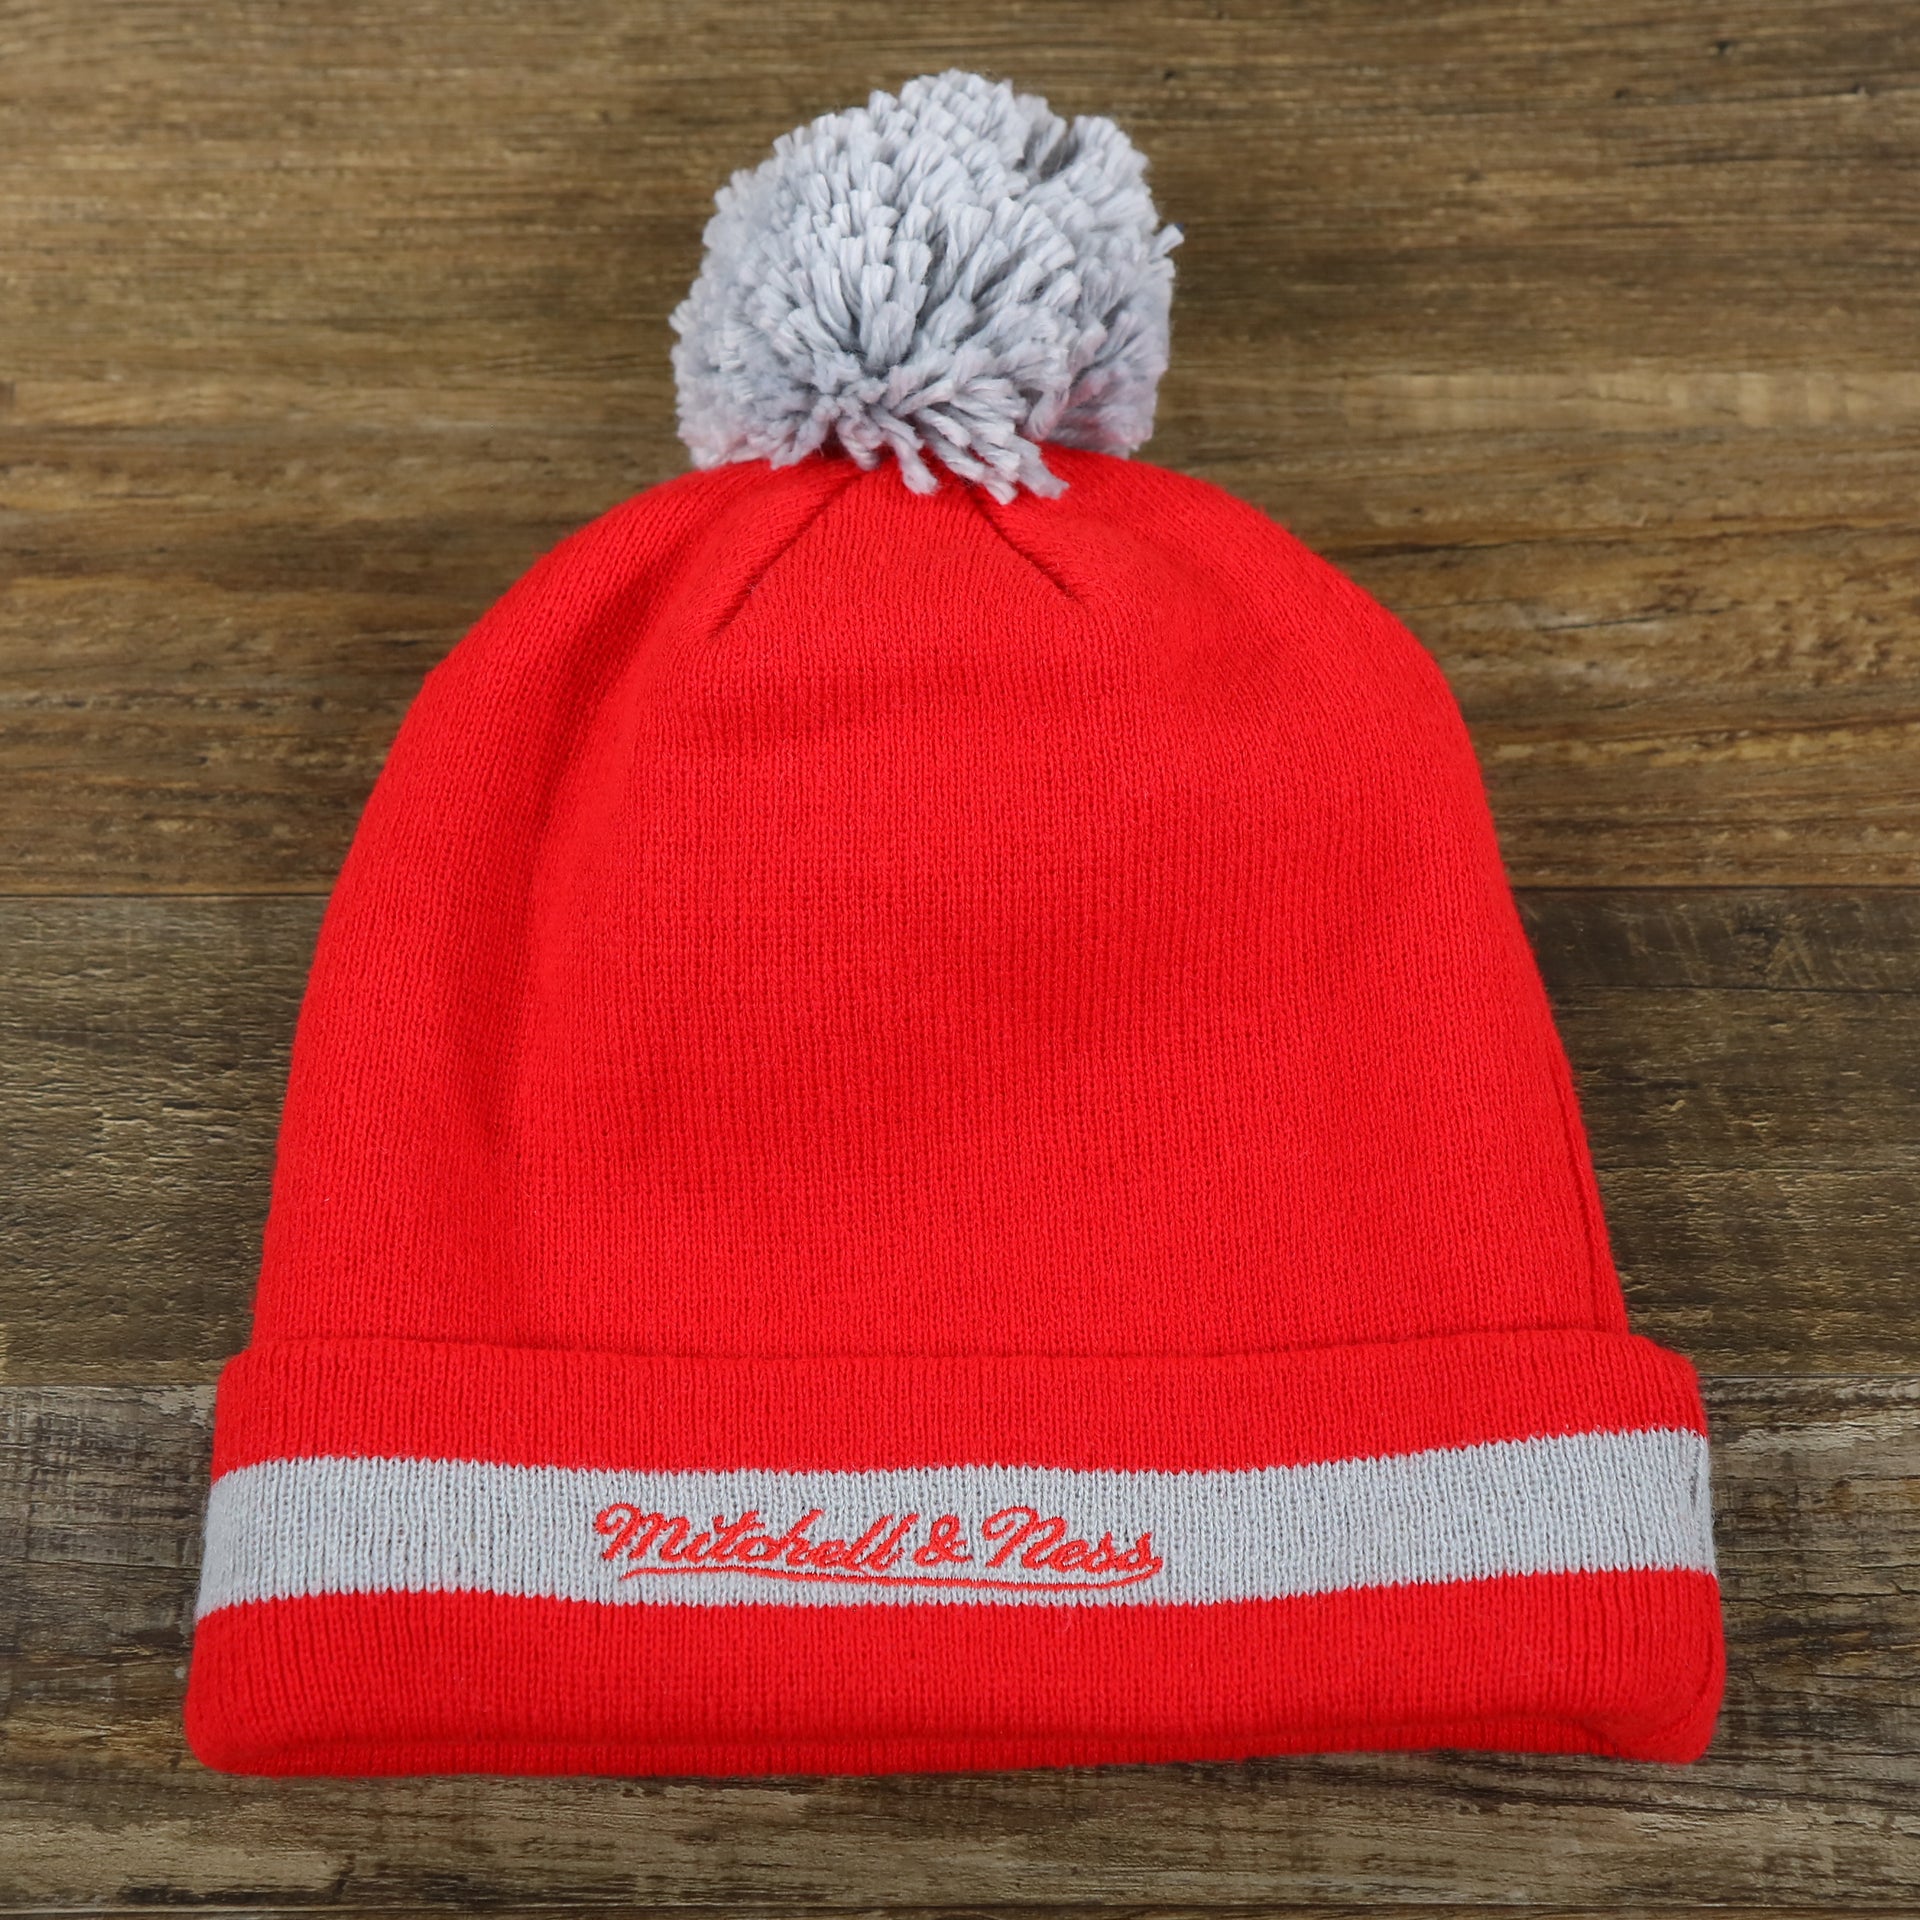 The backside of the Houston Rockets Vintage Red & Gray Beanie OSFM